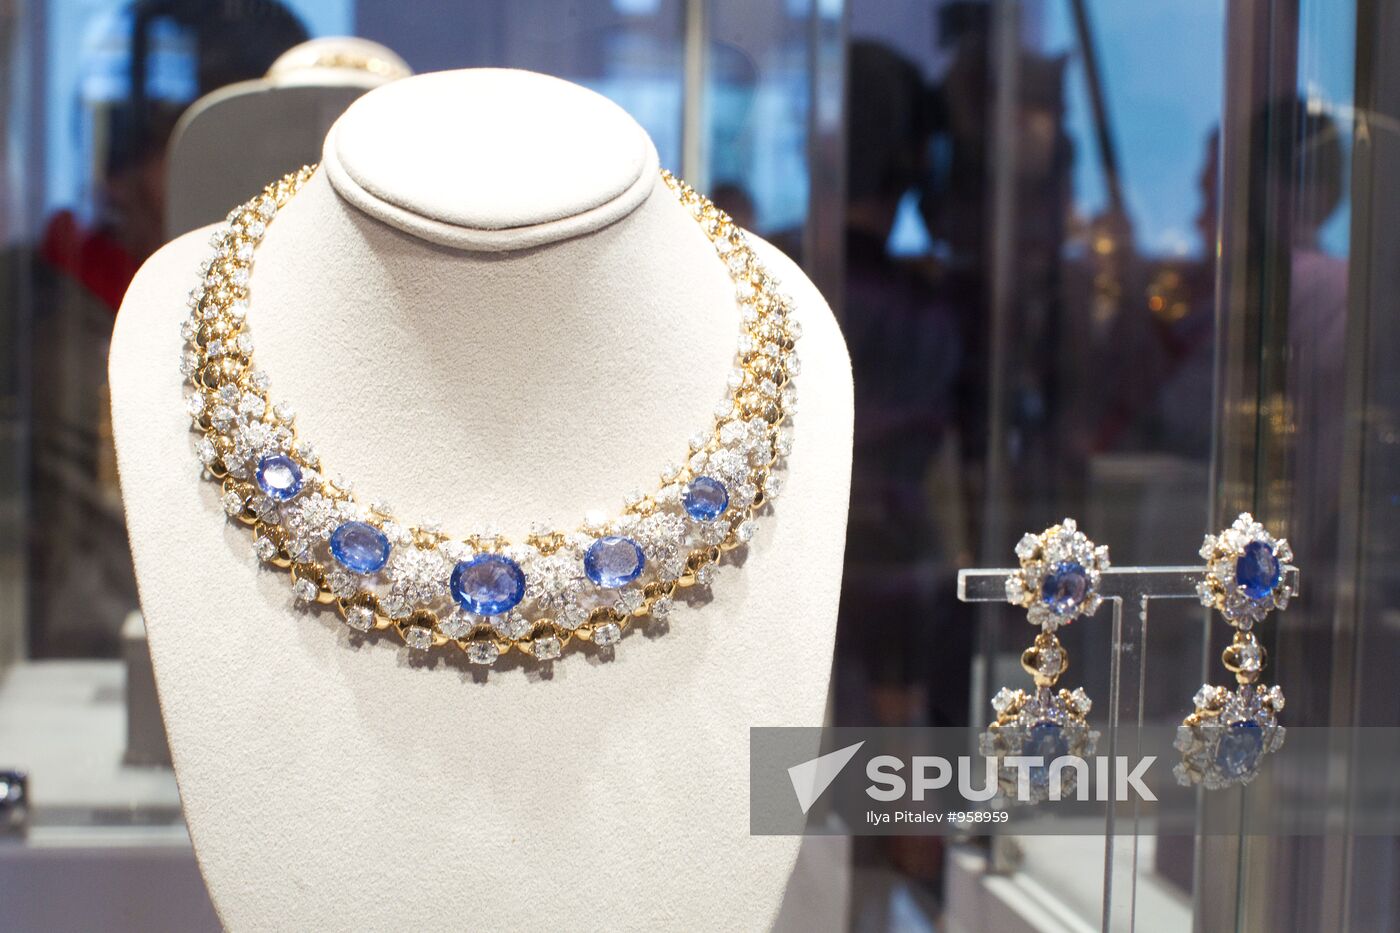 Exhibition of Elizabeth Taylor's clothing and jewelry collection